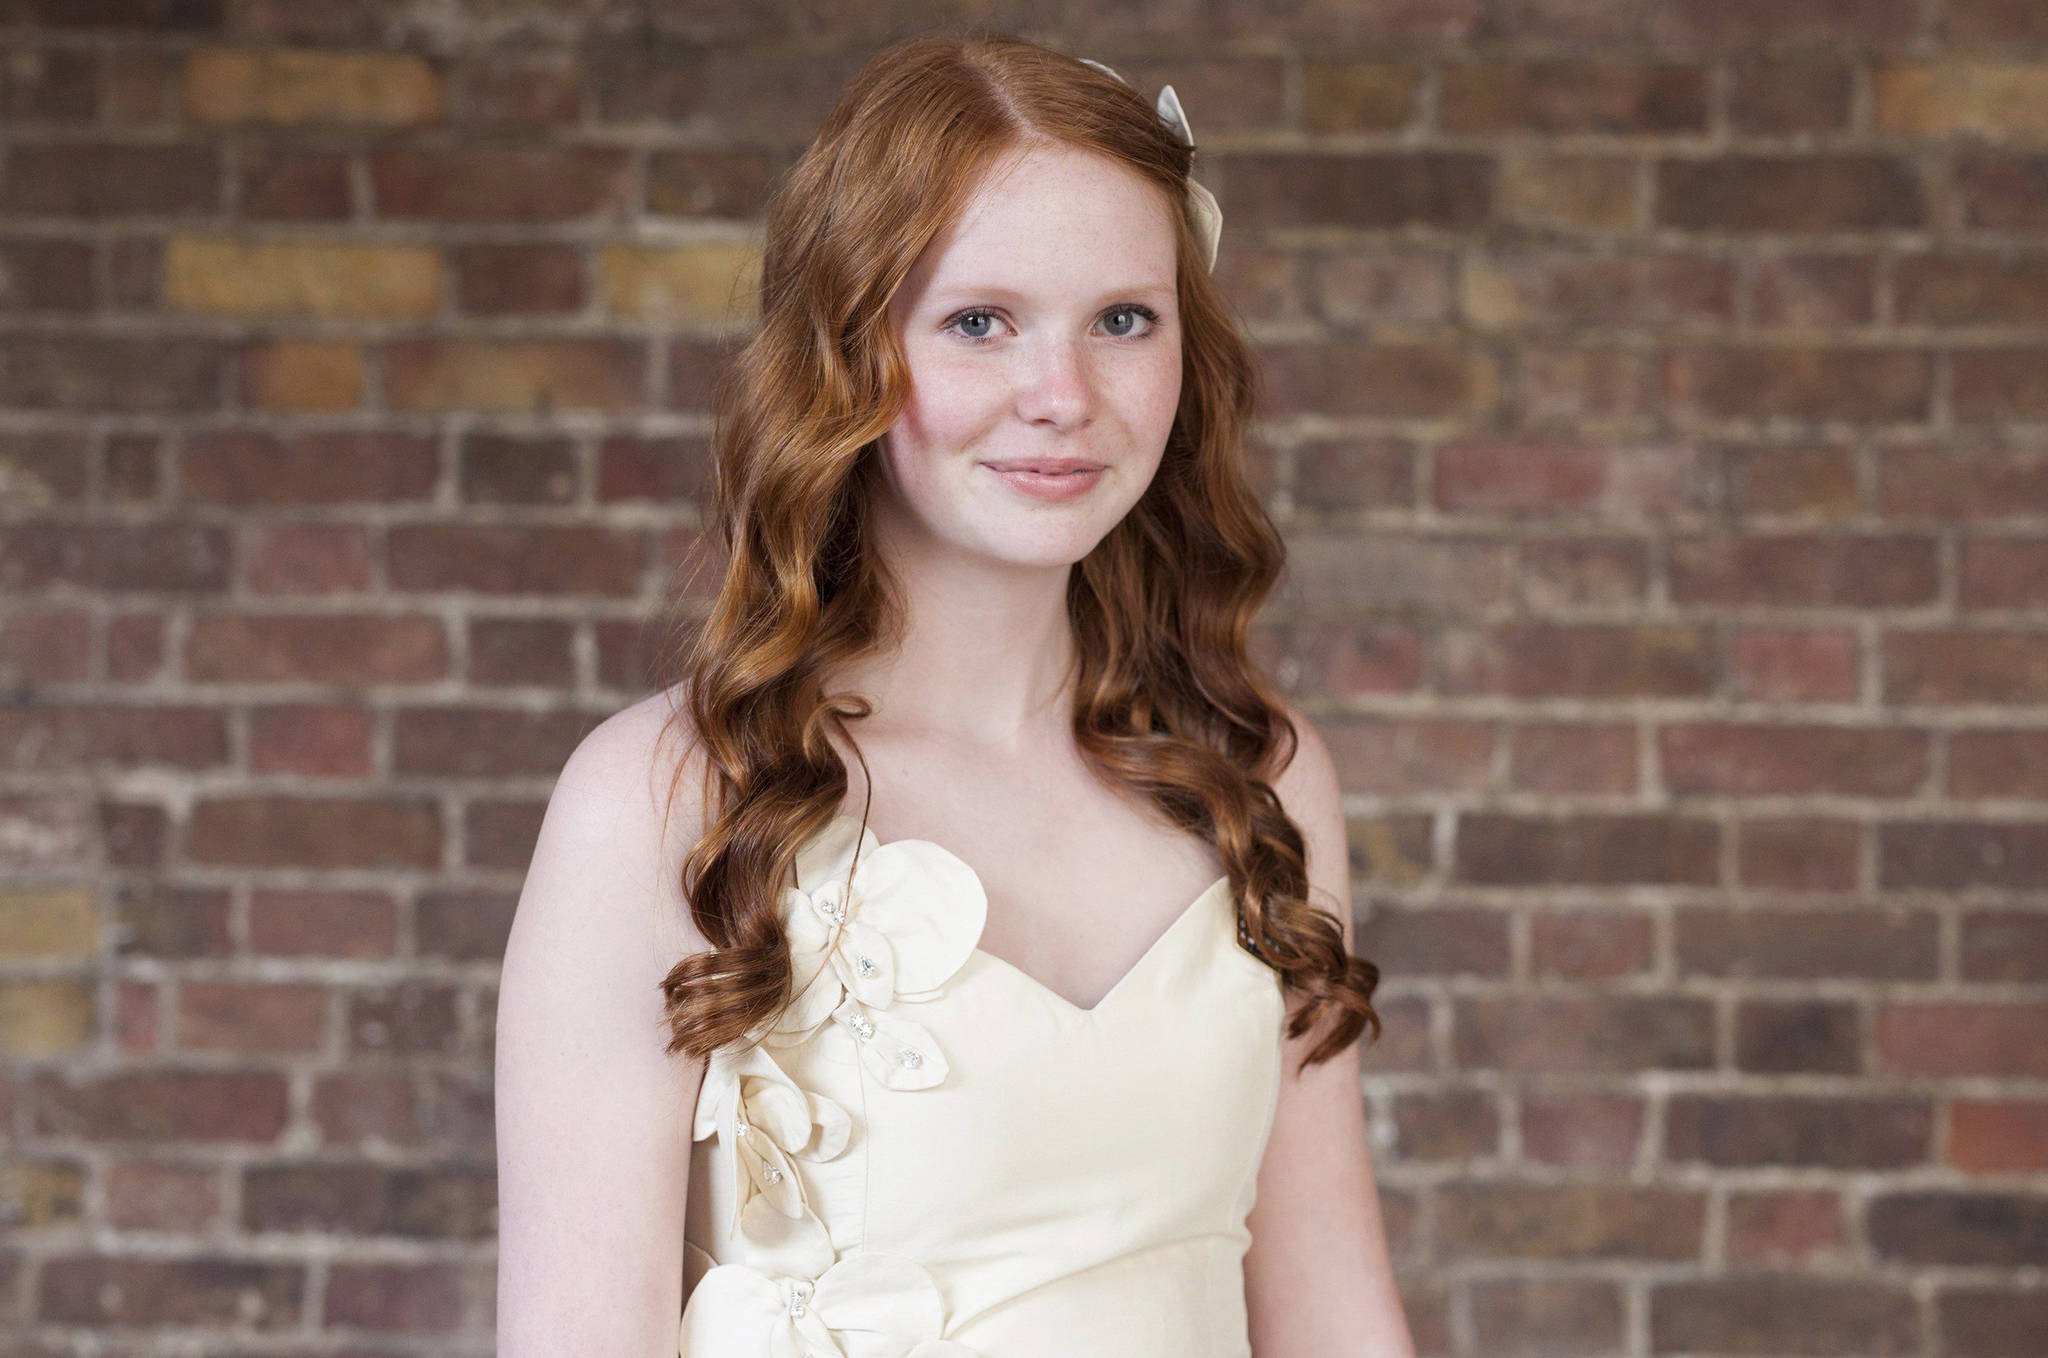 VIDEO: Canadian teen lands invite to Royal wedding